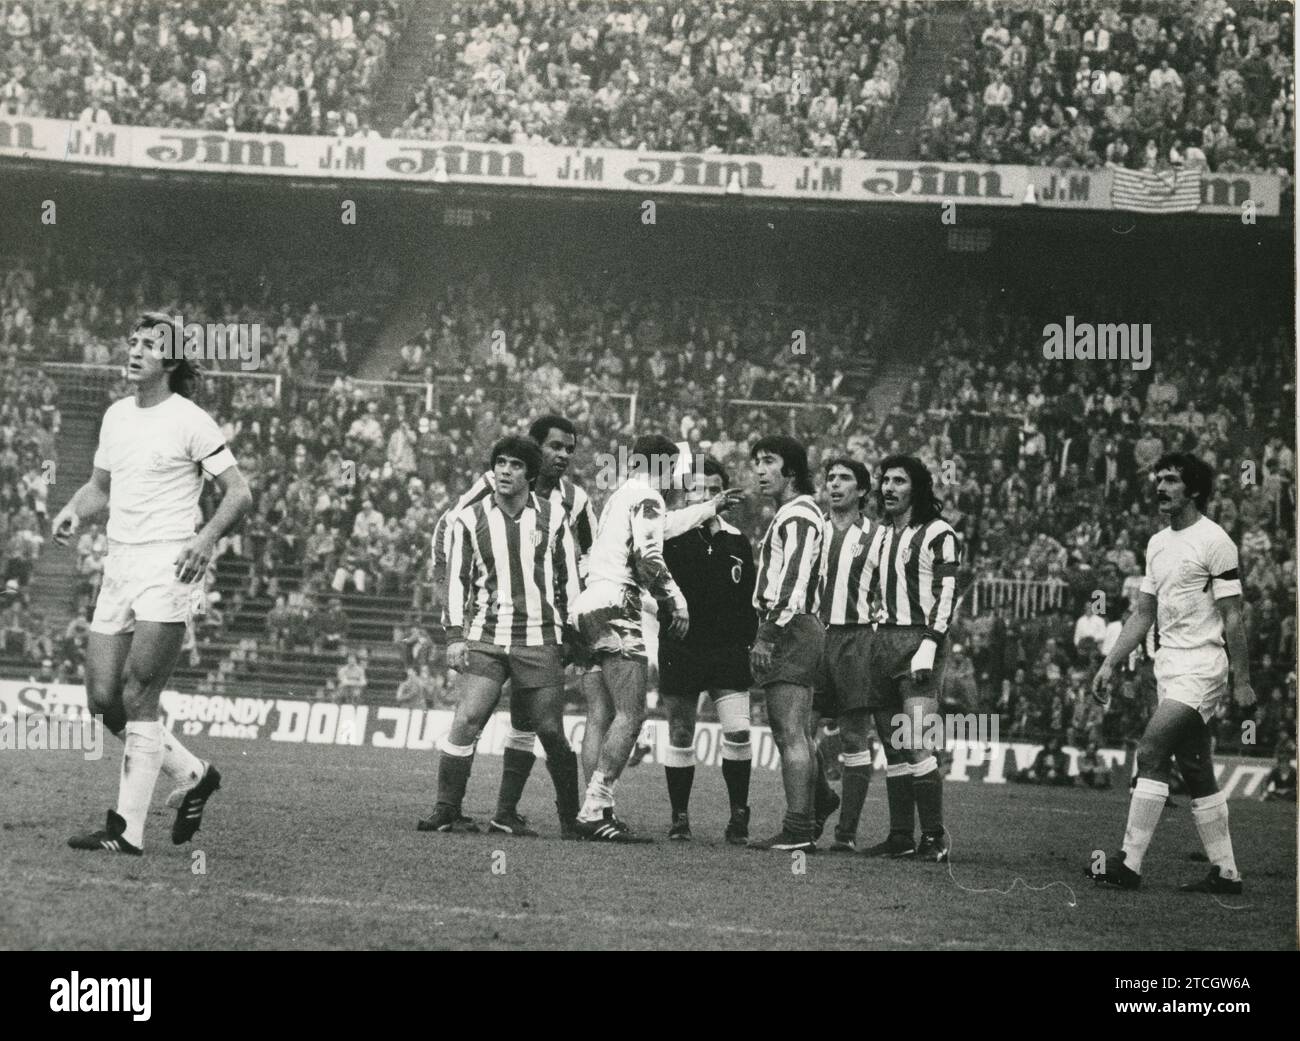 Madrid, 01/02/1977. League match played at the Vicente Calderón stadium between Atlético de Madrid and Real Madrid, which ended with a local victory by 4 goals to 0. In the image, referee Orellana shows a yellow card to Camacho. Credit: Album / Archivo ABC Stock Photo